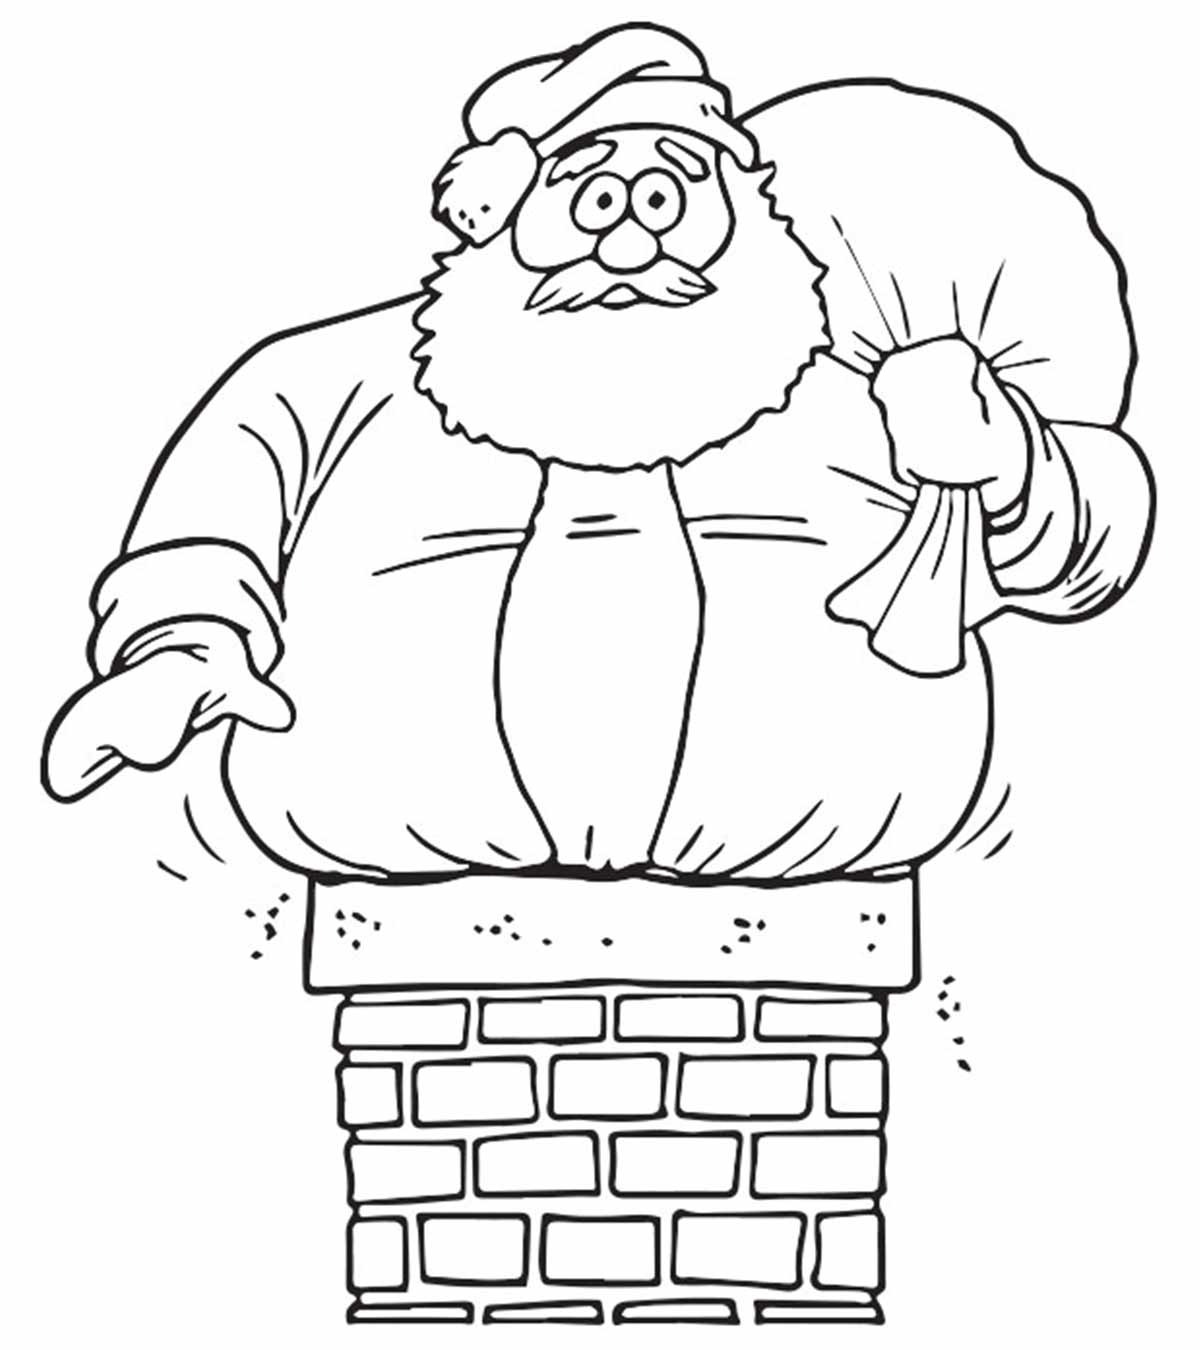 Santa Going Down Chimney Coloring Pages